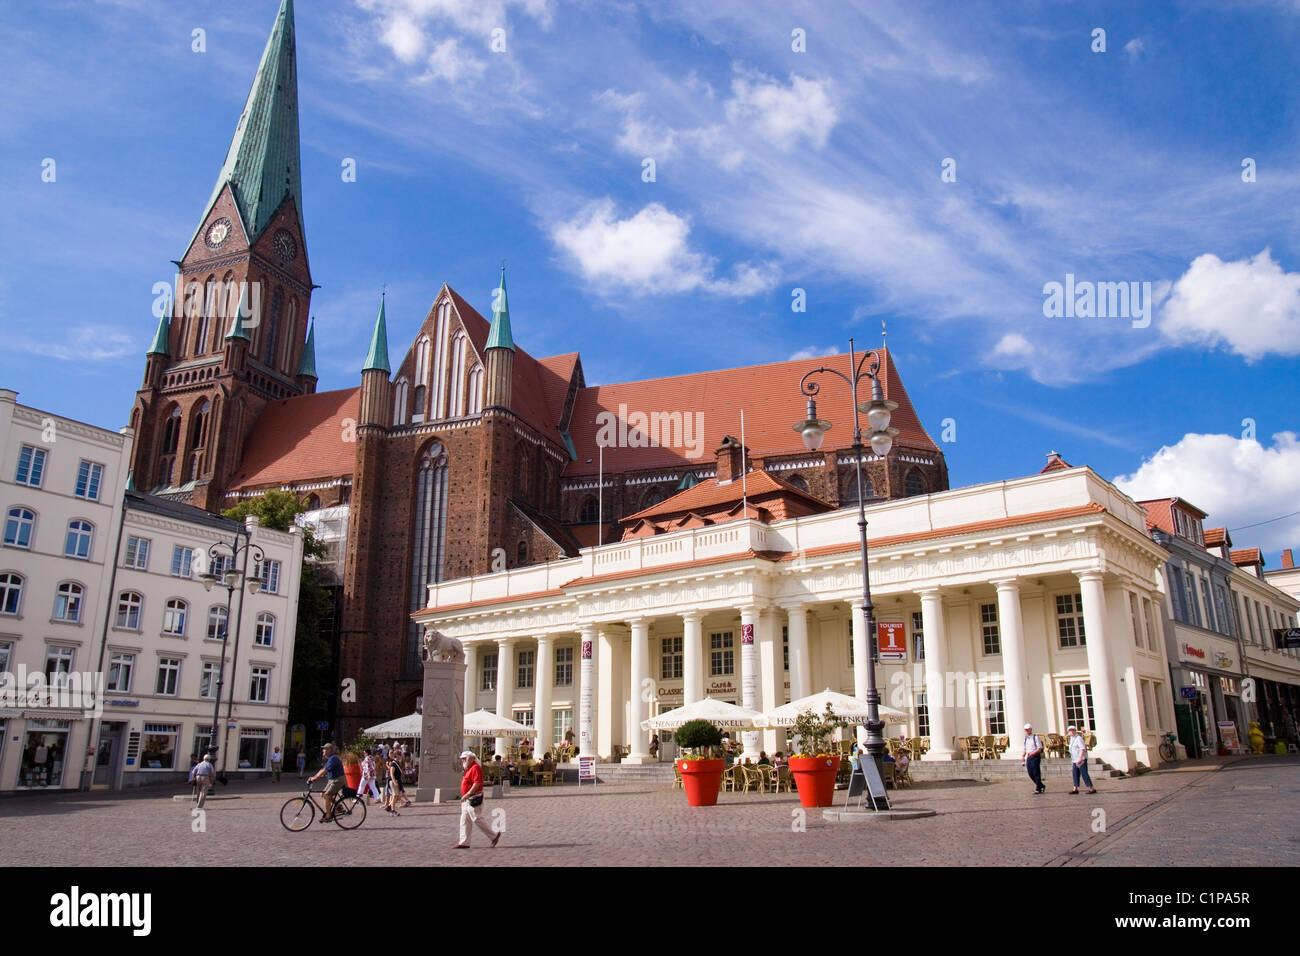 Germany, Schwerin, Neue Gebaude, cathedral and Town Hall overlooking square Stock Photo